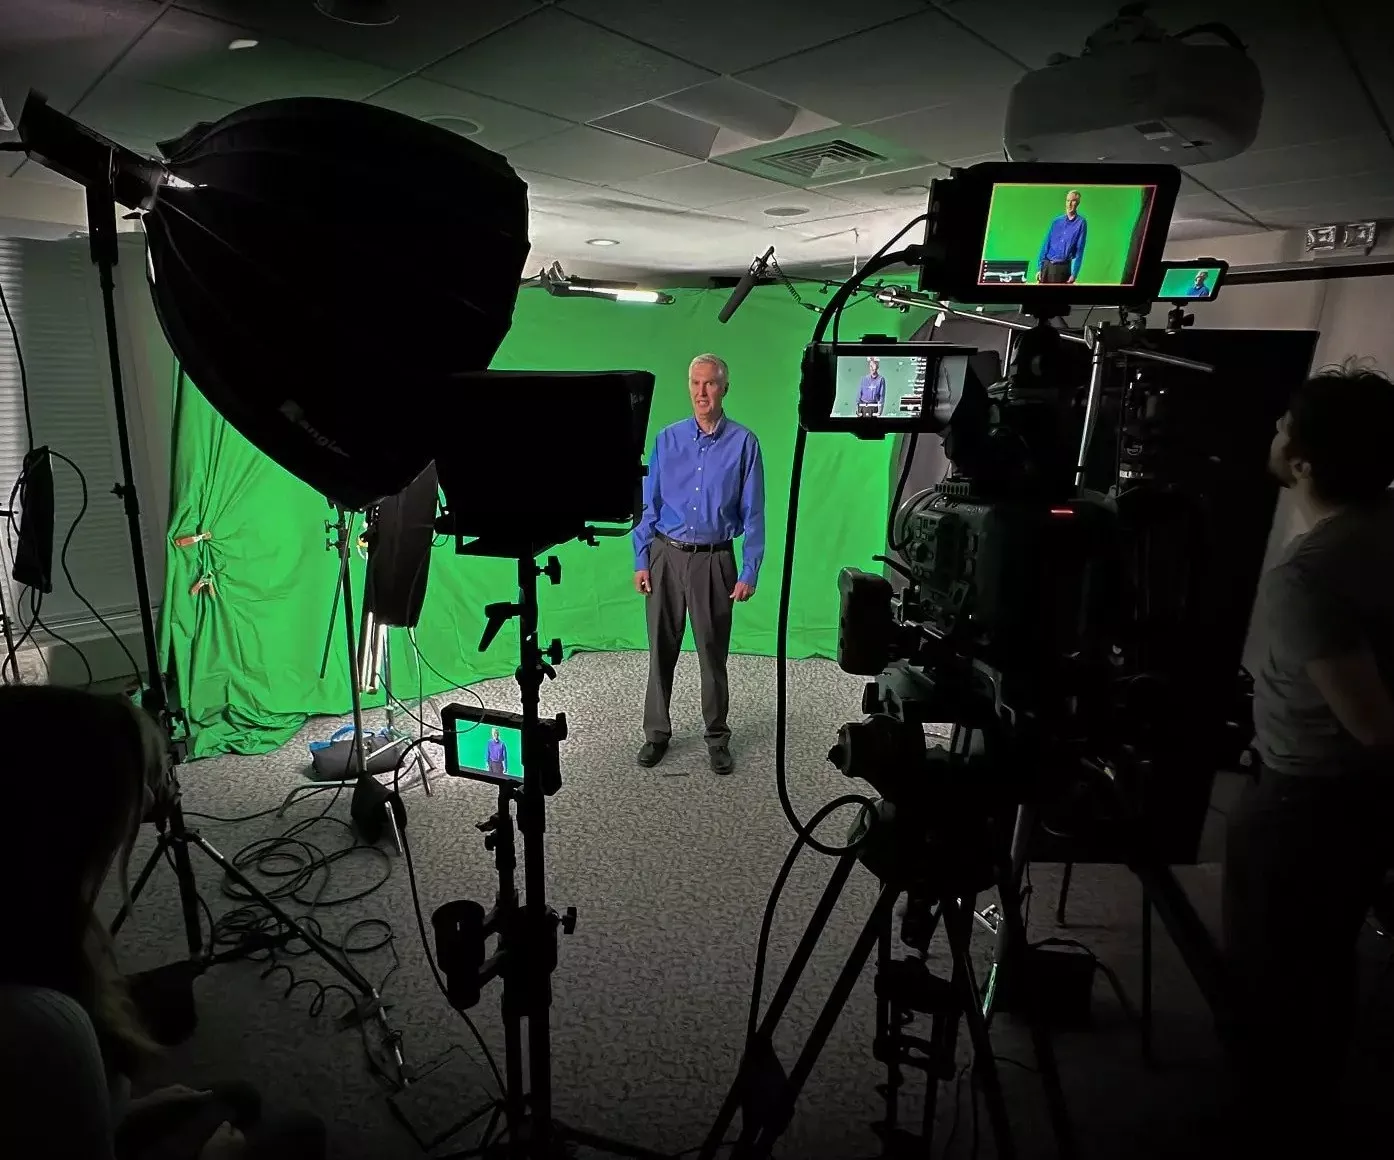 Man standing in front of a green screen on camera